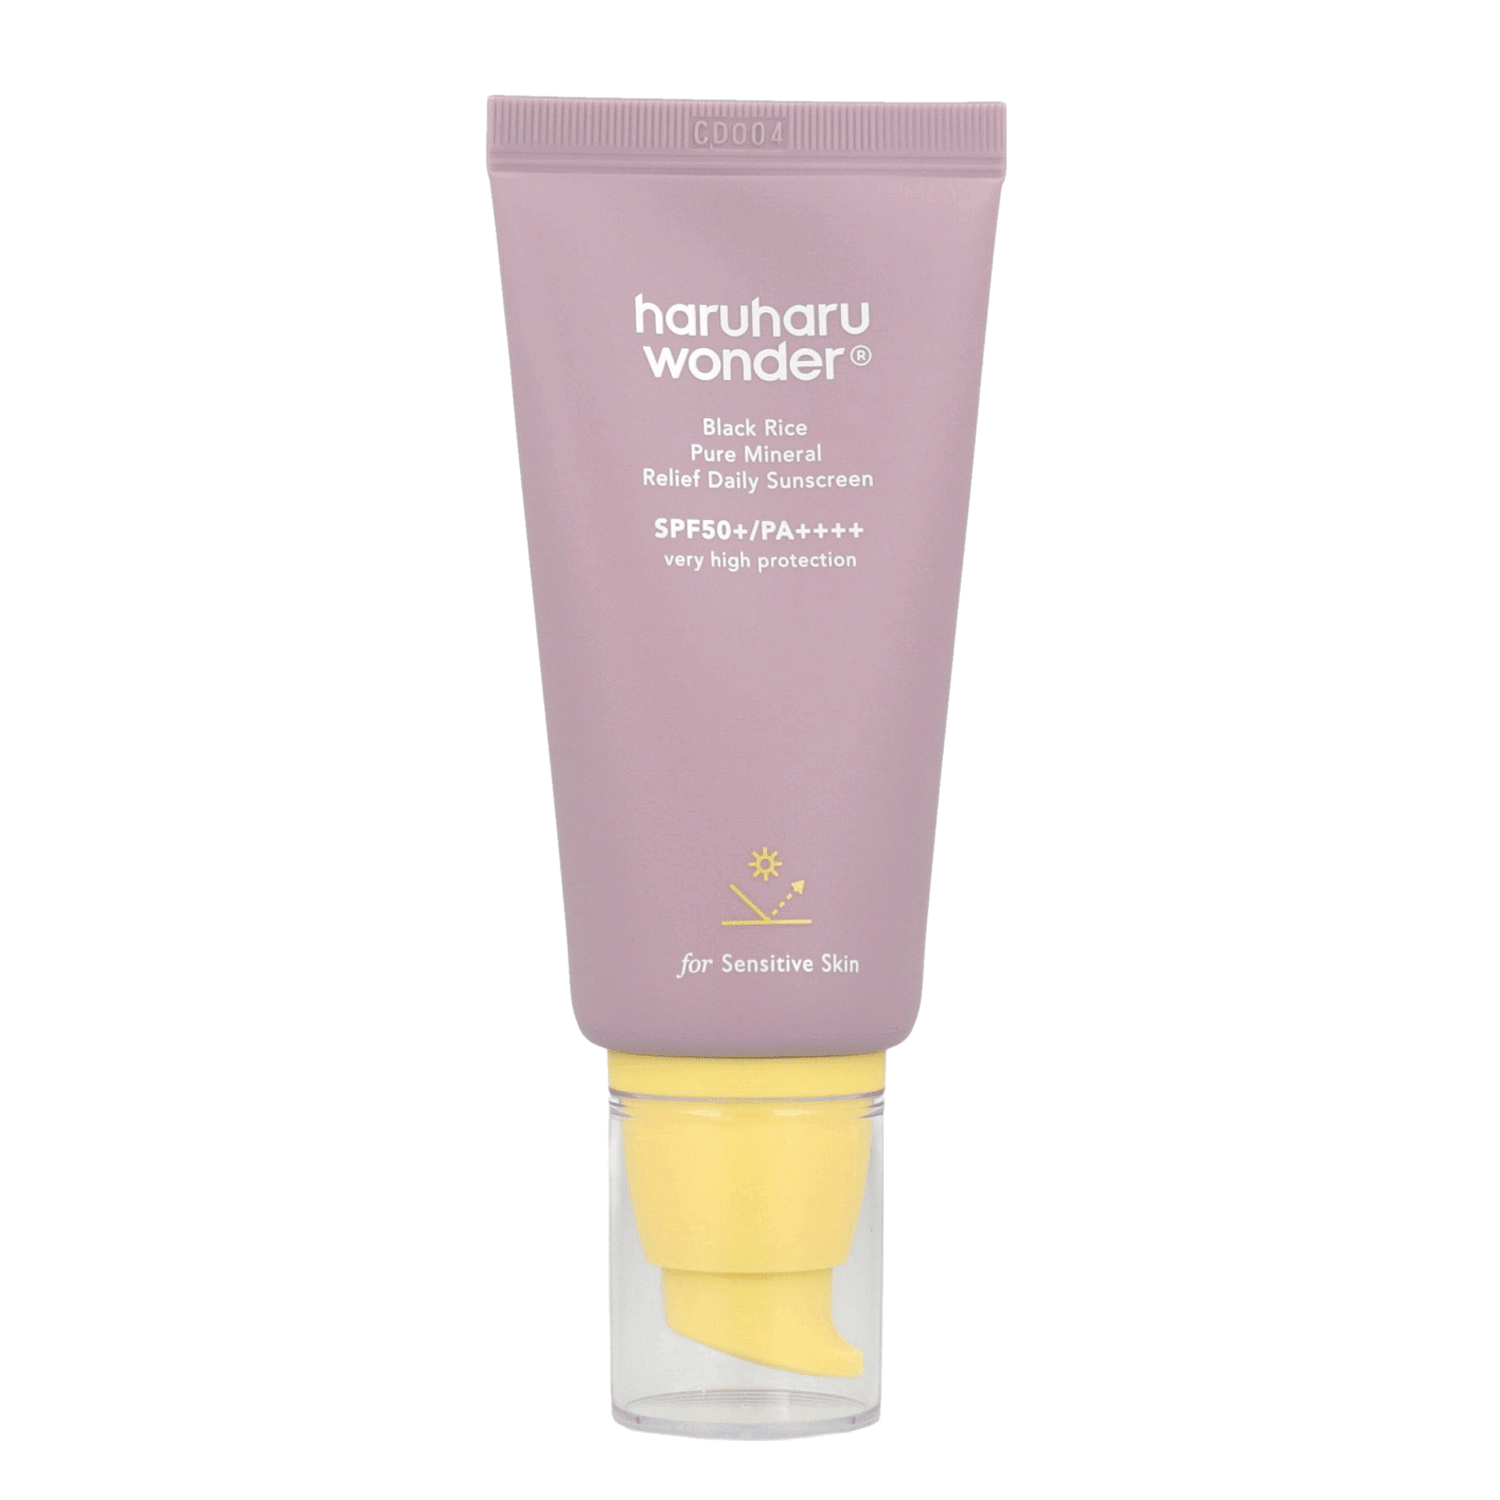 haruharu WONDER Black Rice Pure Mineral Relief Daily Sunscreen SPF50+ PA++++ 50ml - DODOSKIN